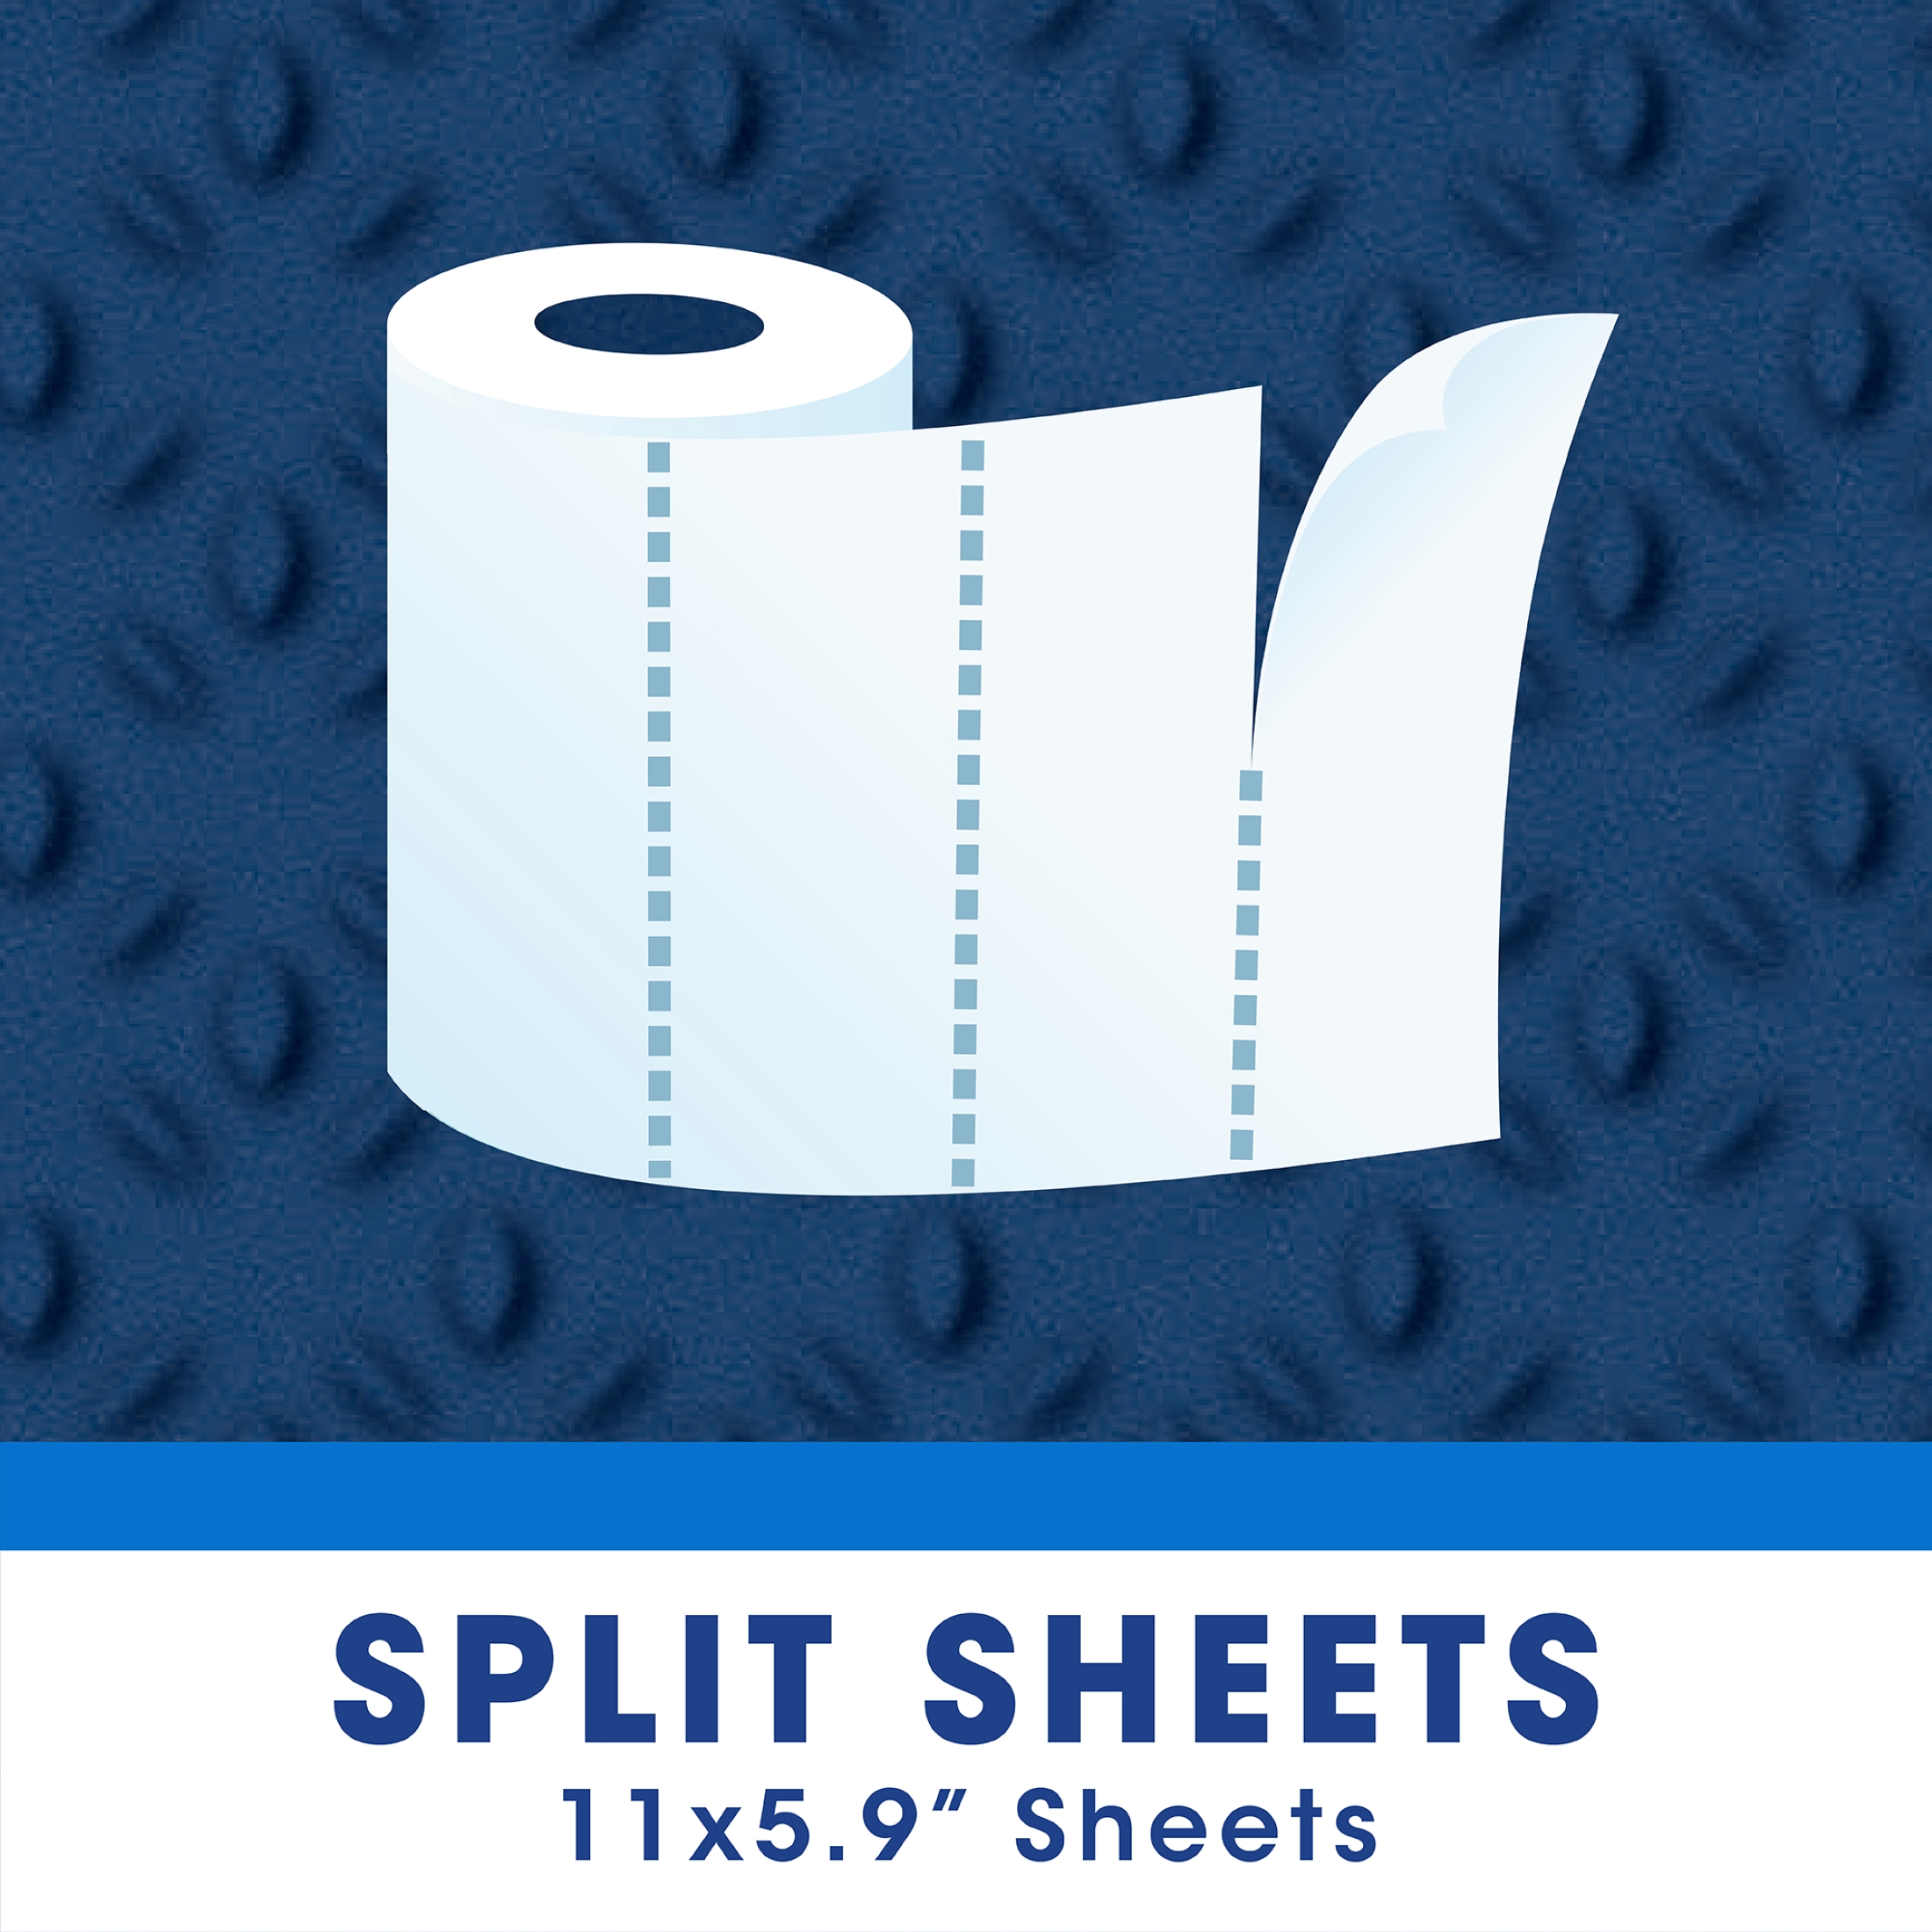 Great Value Ultra Strong Paper Towels, Split Sheets, 6 Double Rolls - image 4 of 9